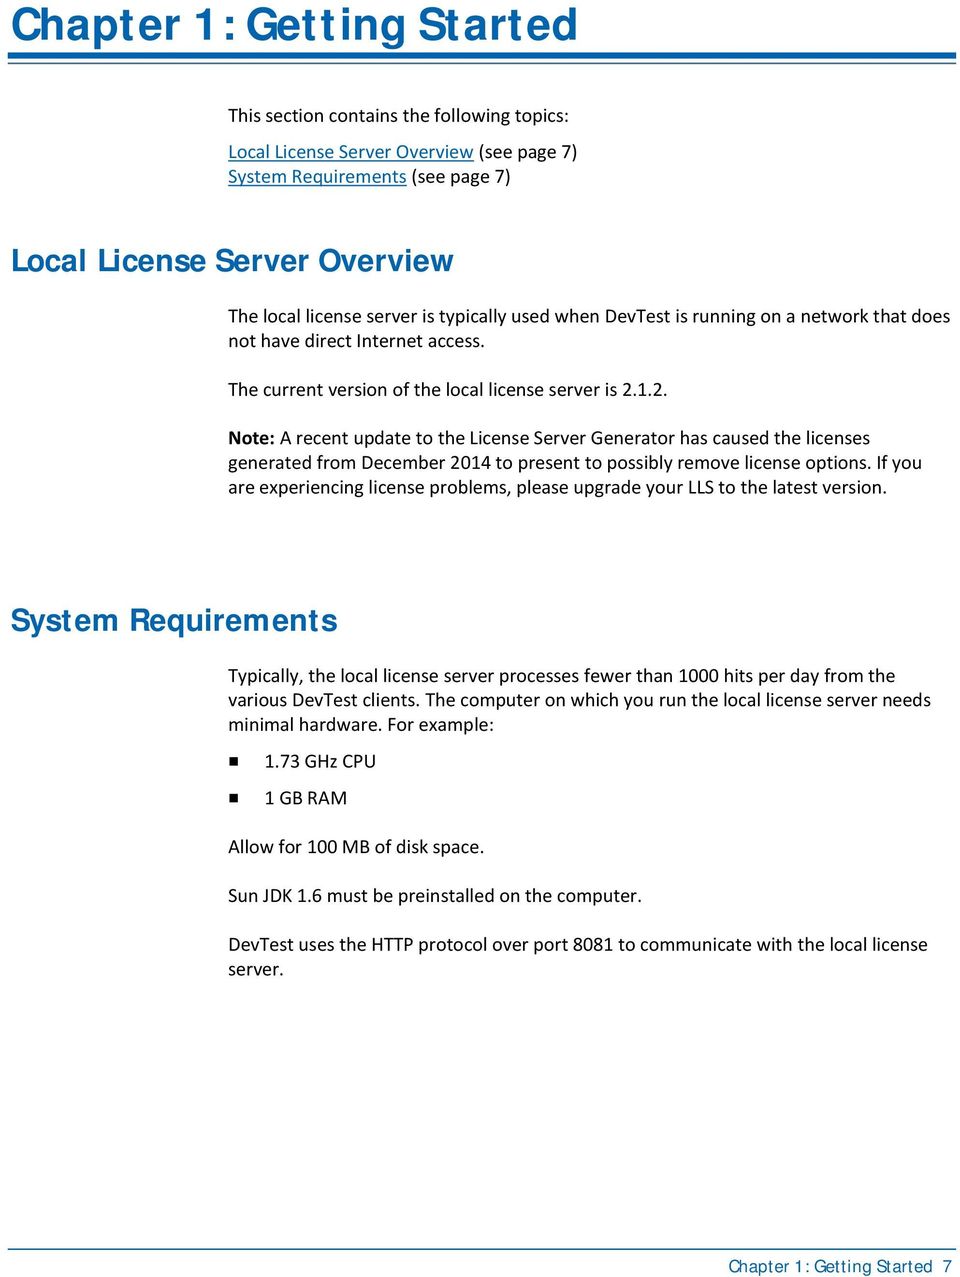 1.2. Note: A recent update to the License Server Generator has caused the licenses generated from December 2014 to present to possibly remove license options.